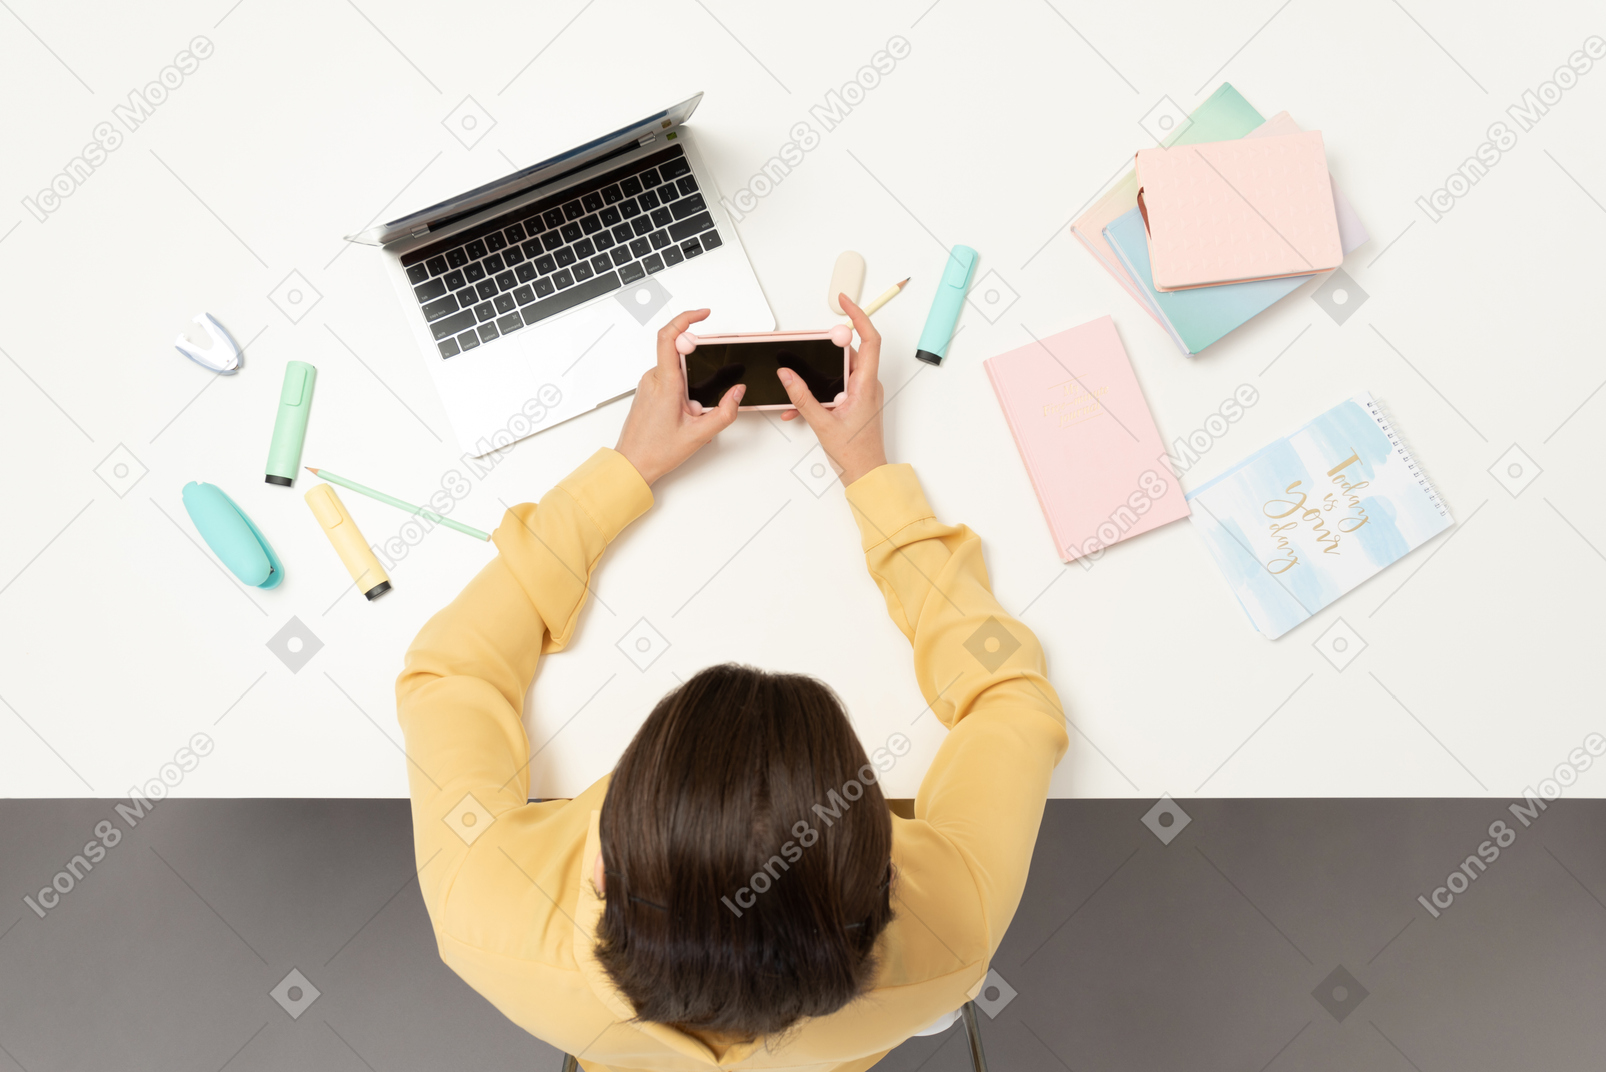 A female office worker holding mobile phone